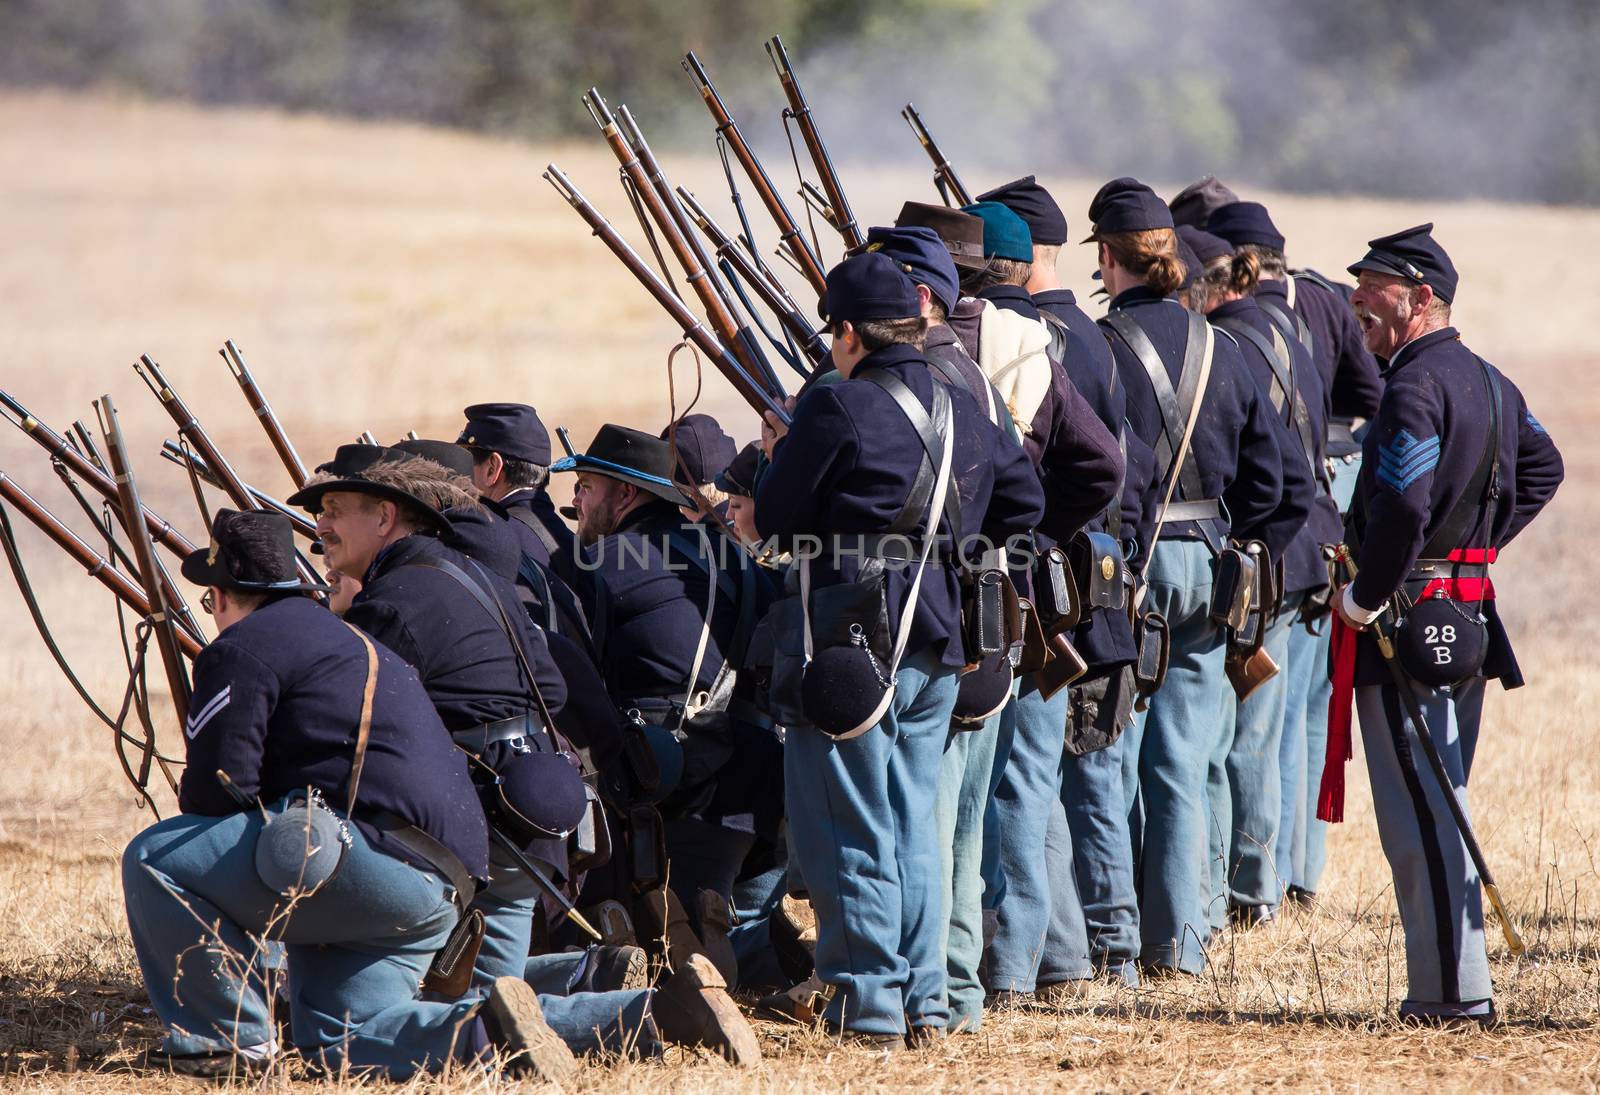 A line of American Civil War infantry from the Northern States fire in line at the Confederate troops across the field at Hawes Farm in northern California.nPhoto taken on: October 03rd, 2015.